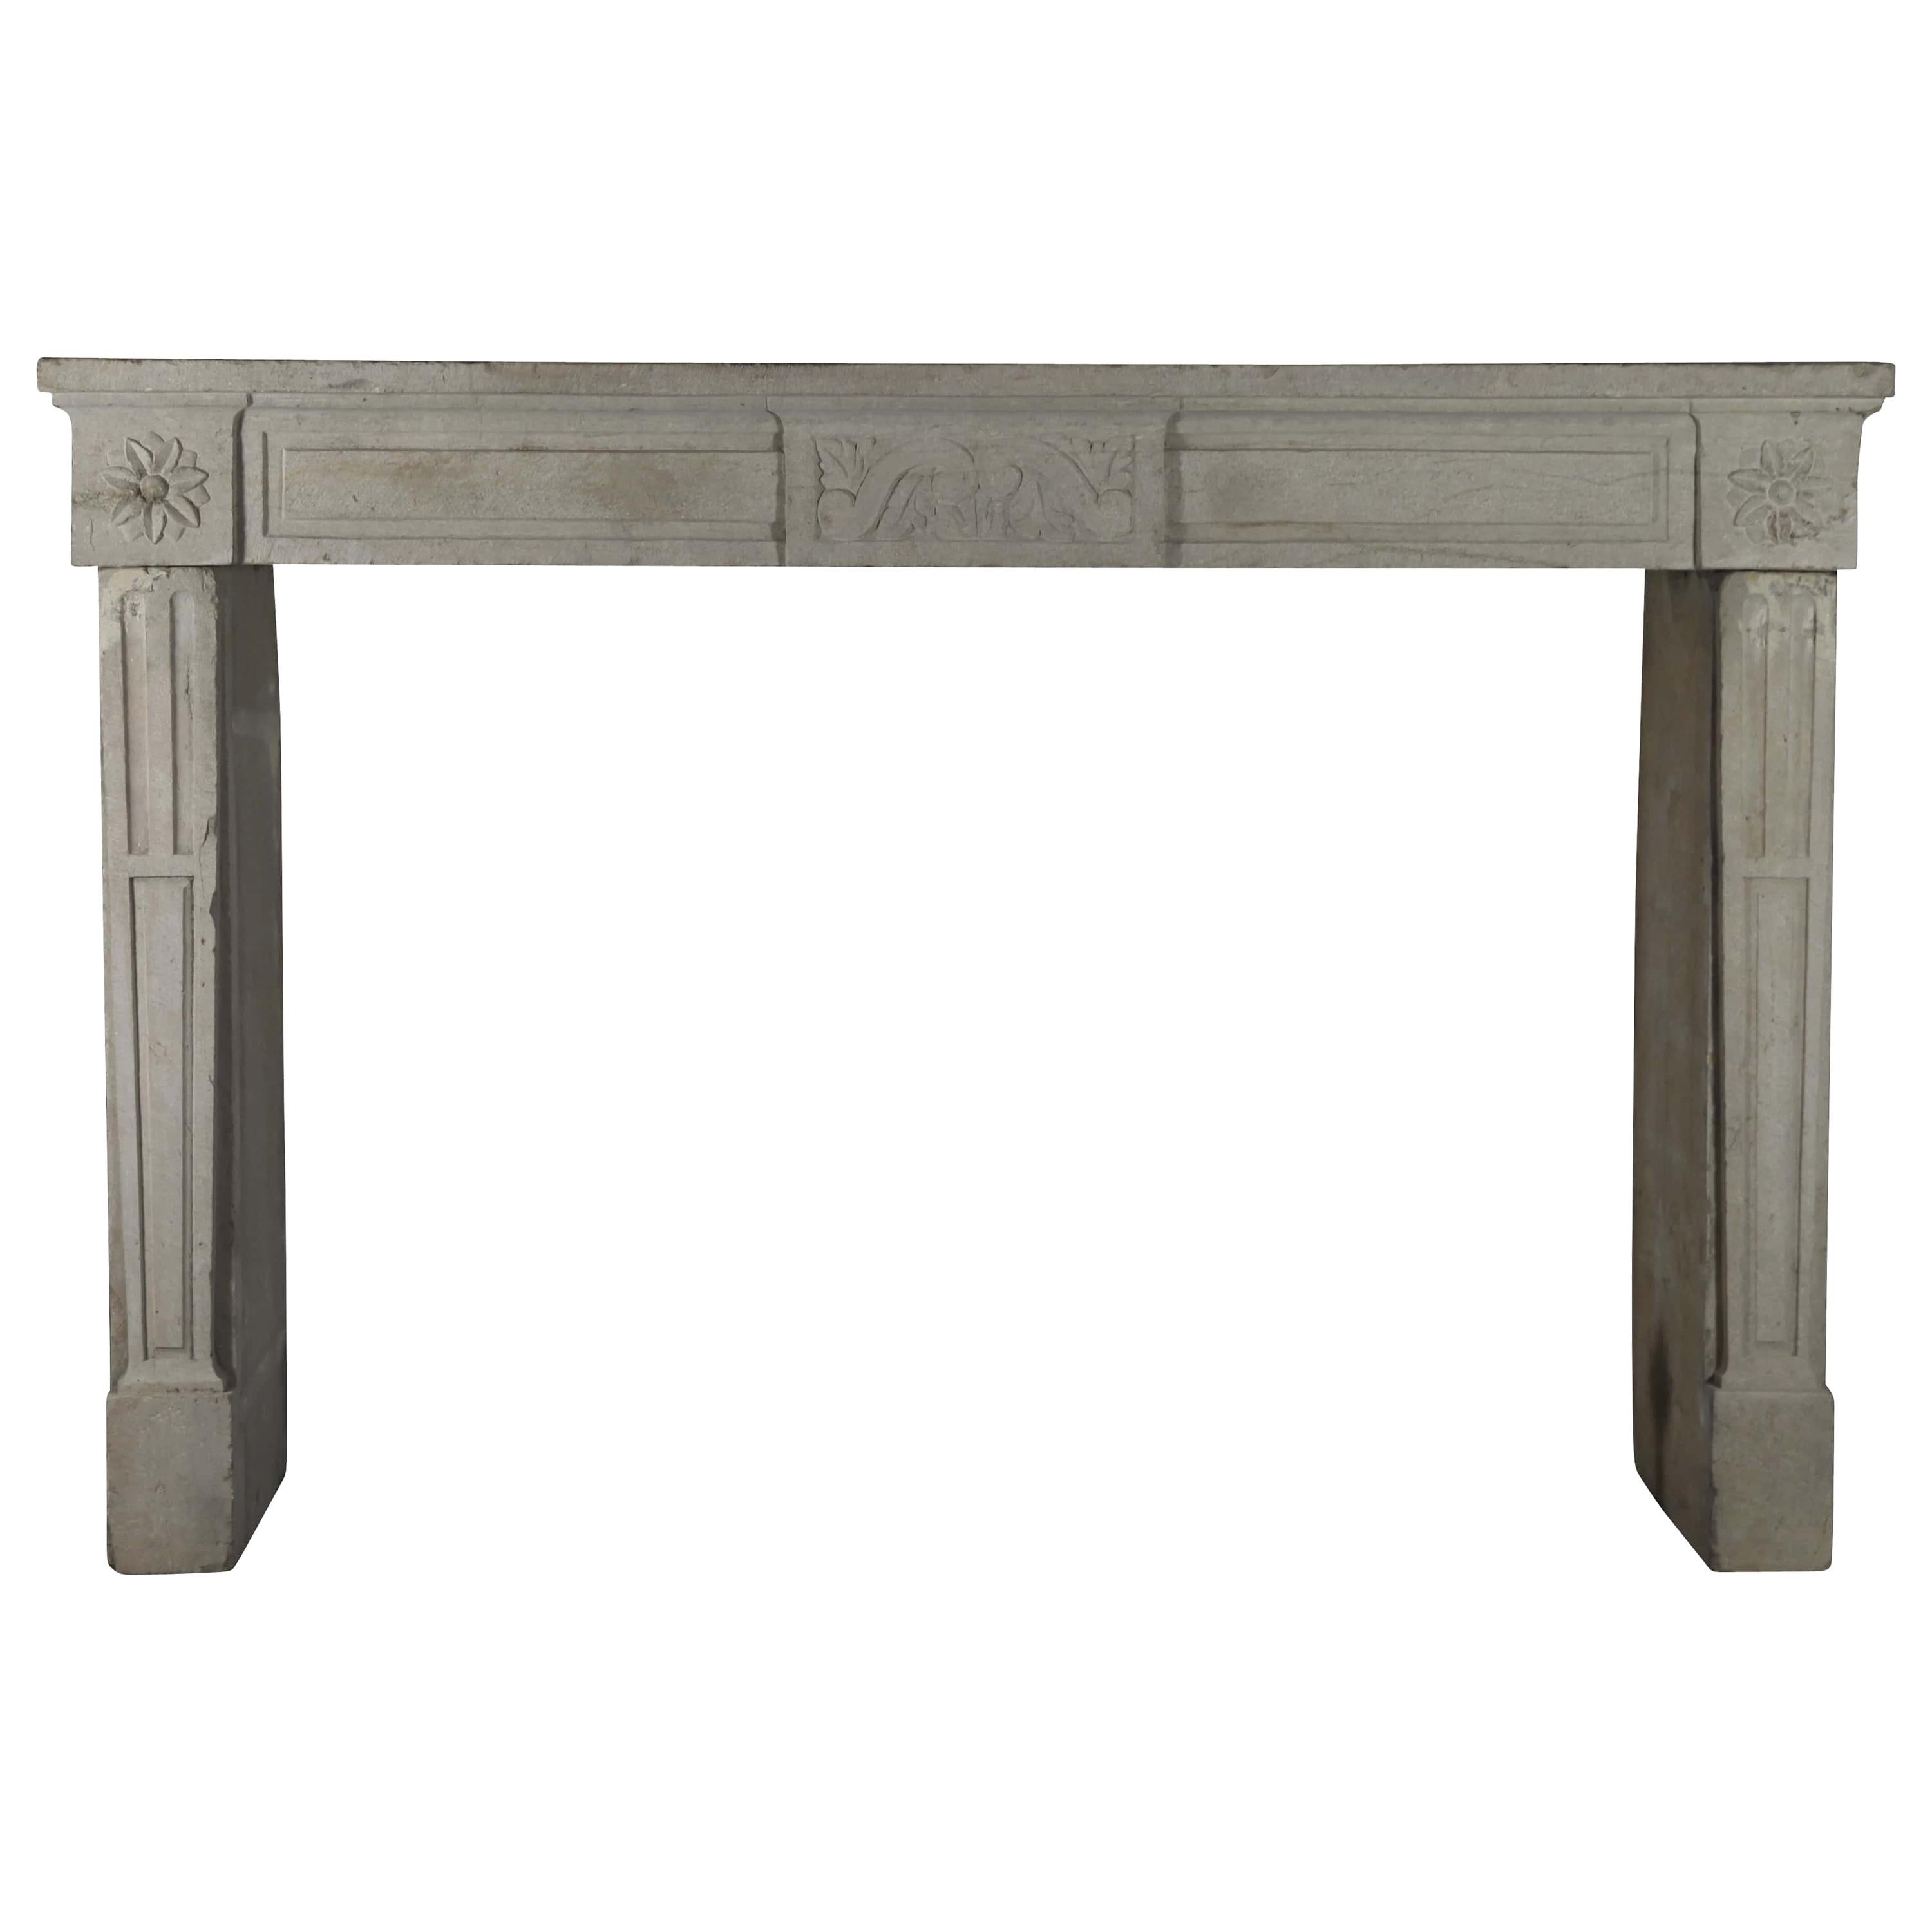 Vintage French Country Style Limestone Fireplace Surround For Sale